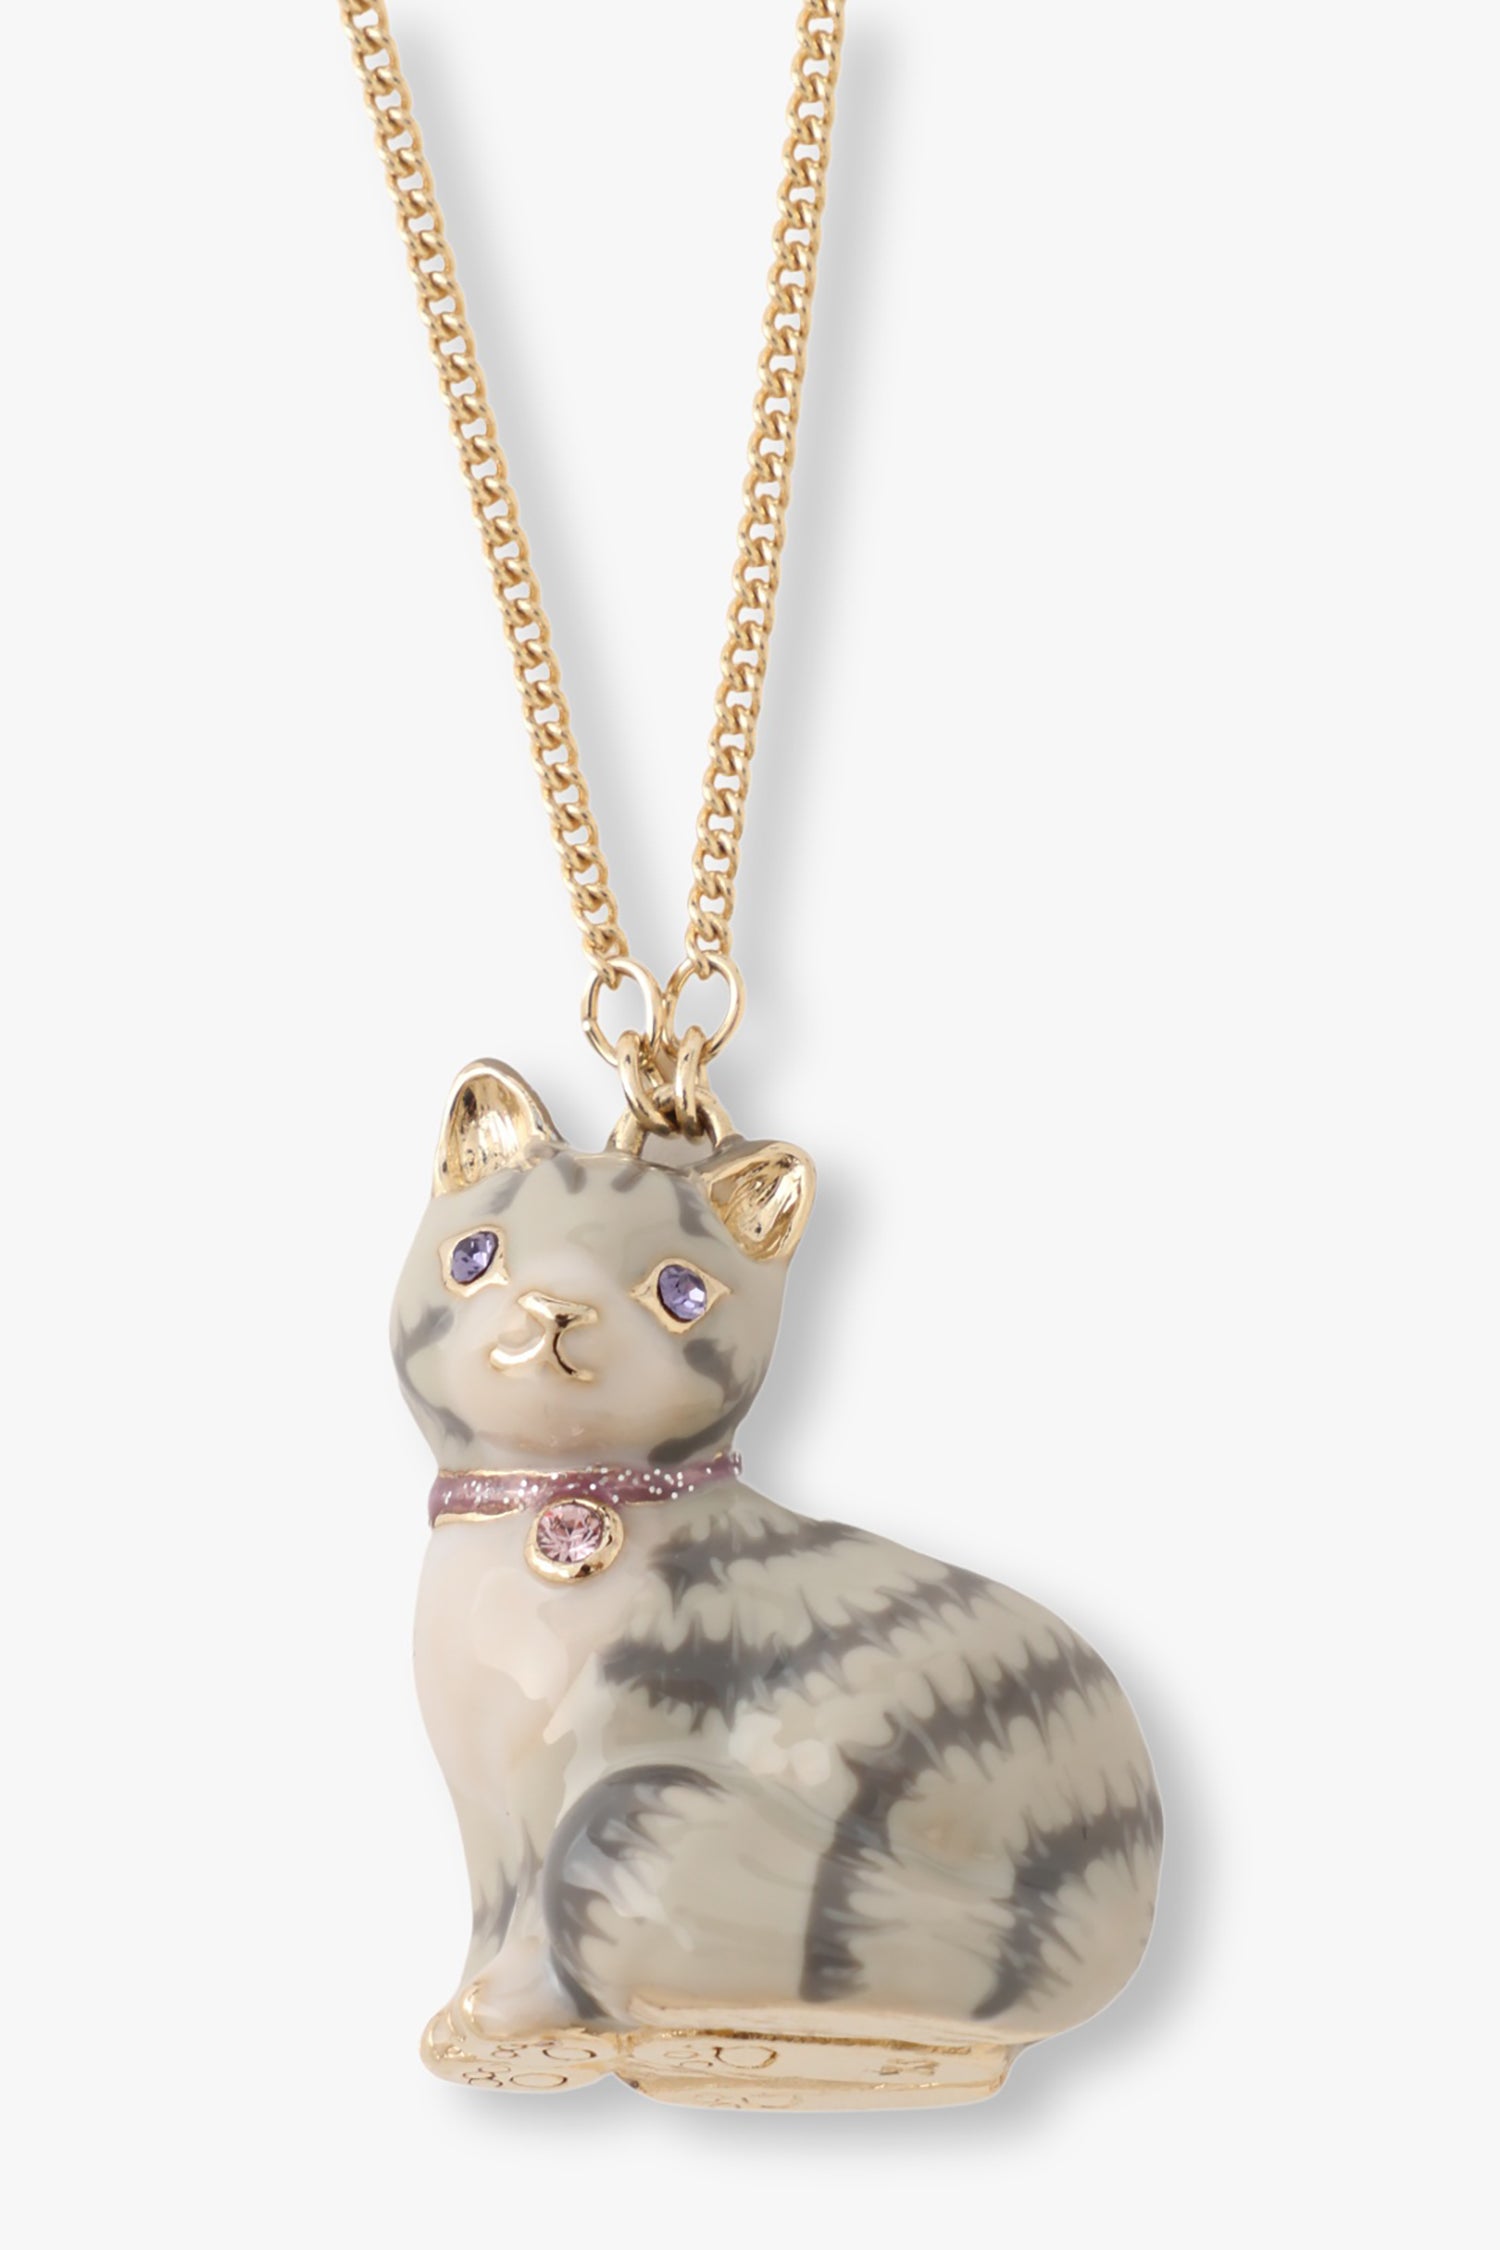 Cat Necklace featuring jeweled purple eyes, with golden details, purple necklace on sitting cat